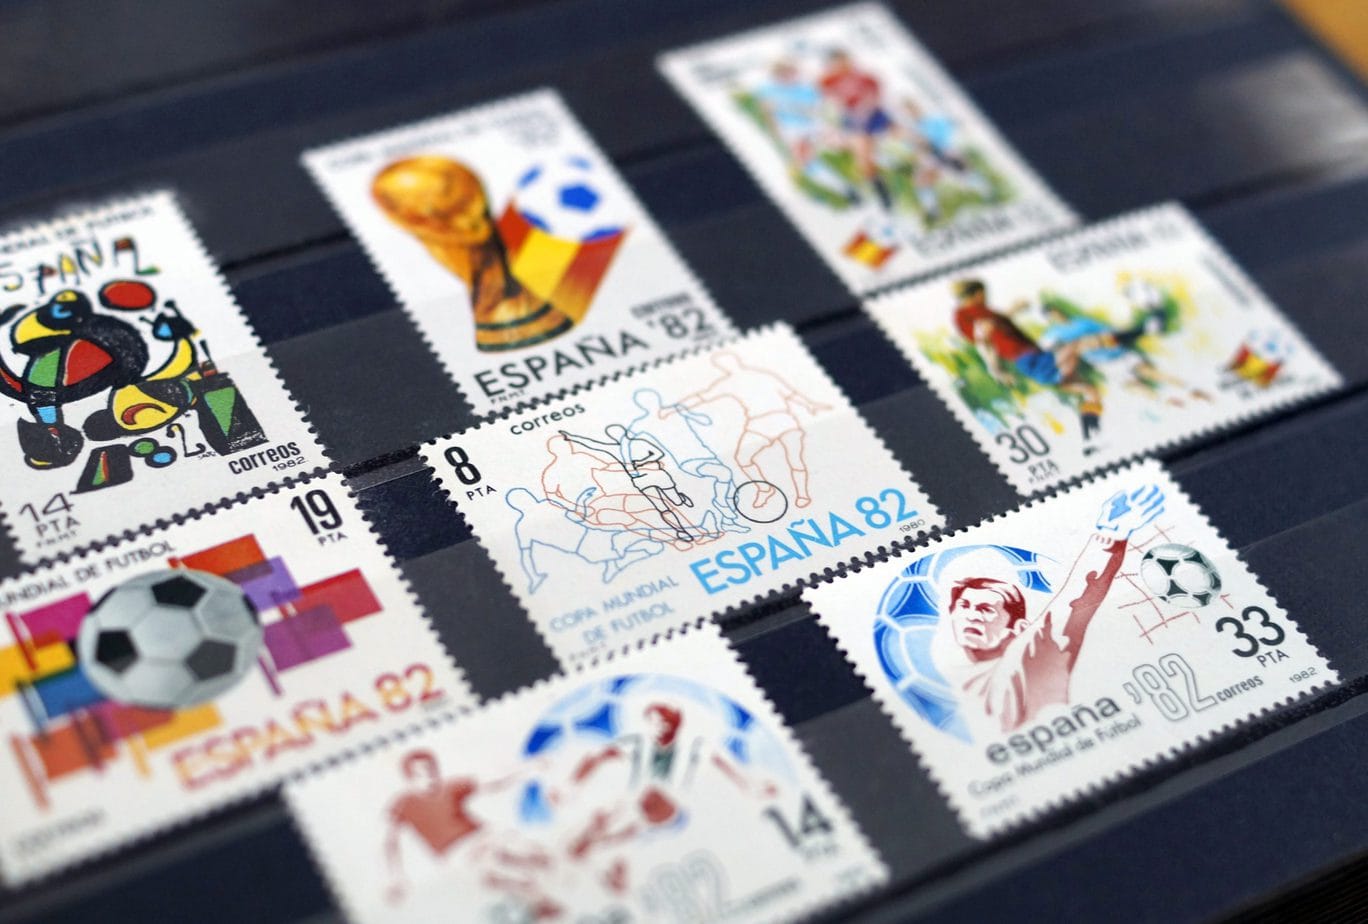 Where to start collecting stamps?